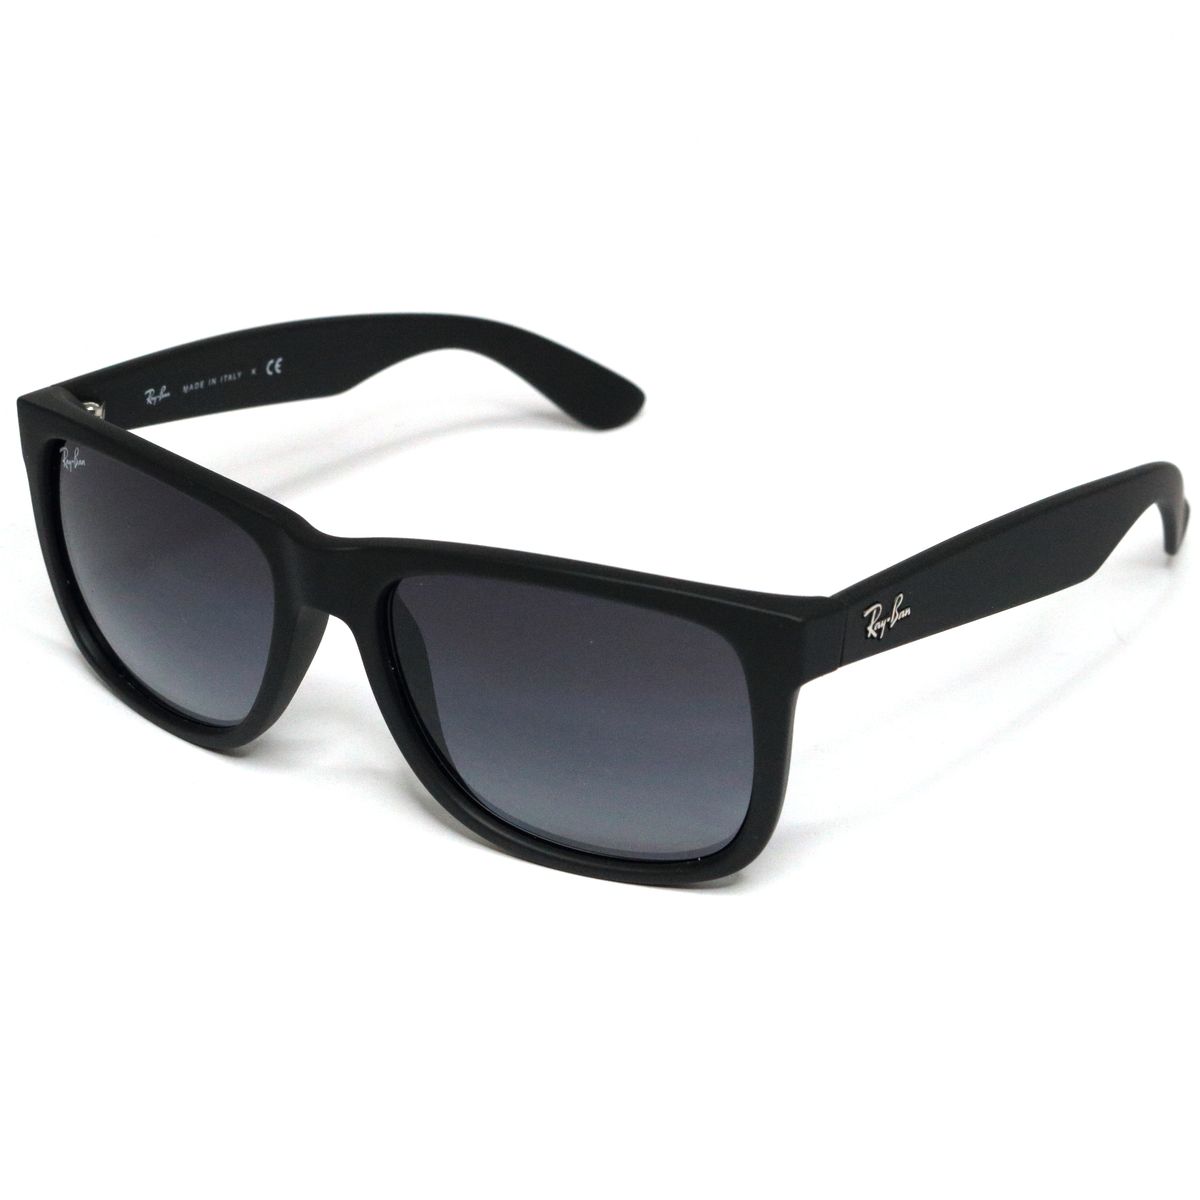 Justin Classic Sunglasses RB4165 601 8G - size 55